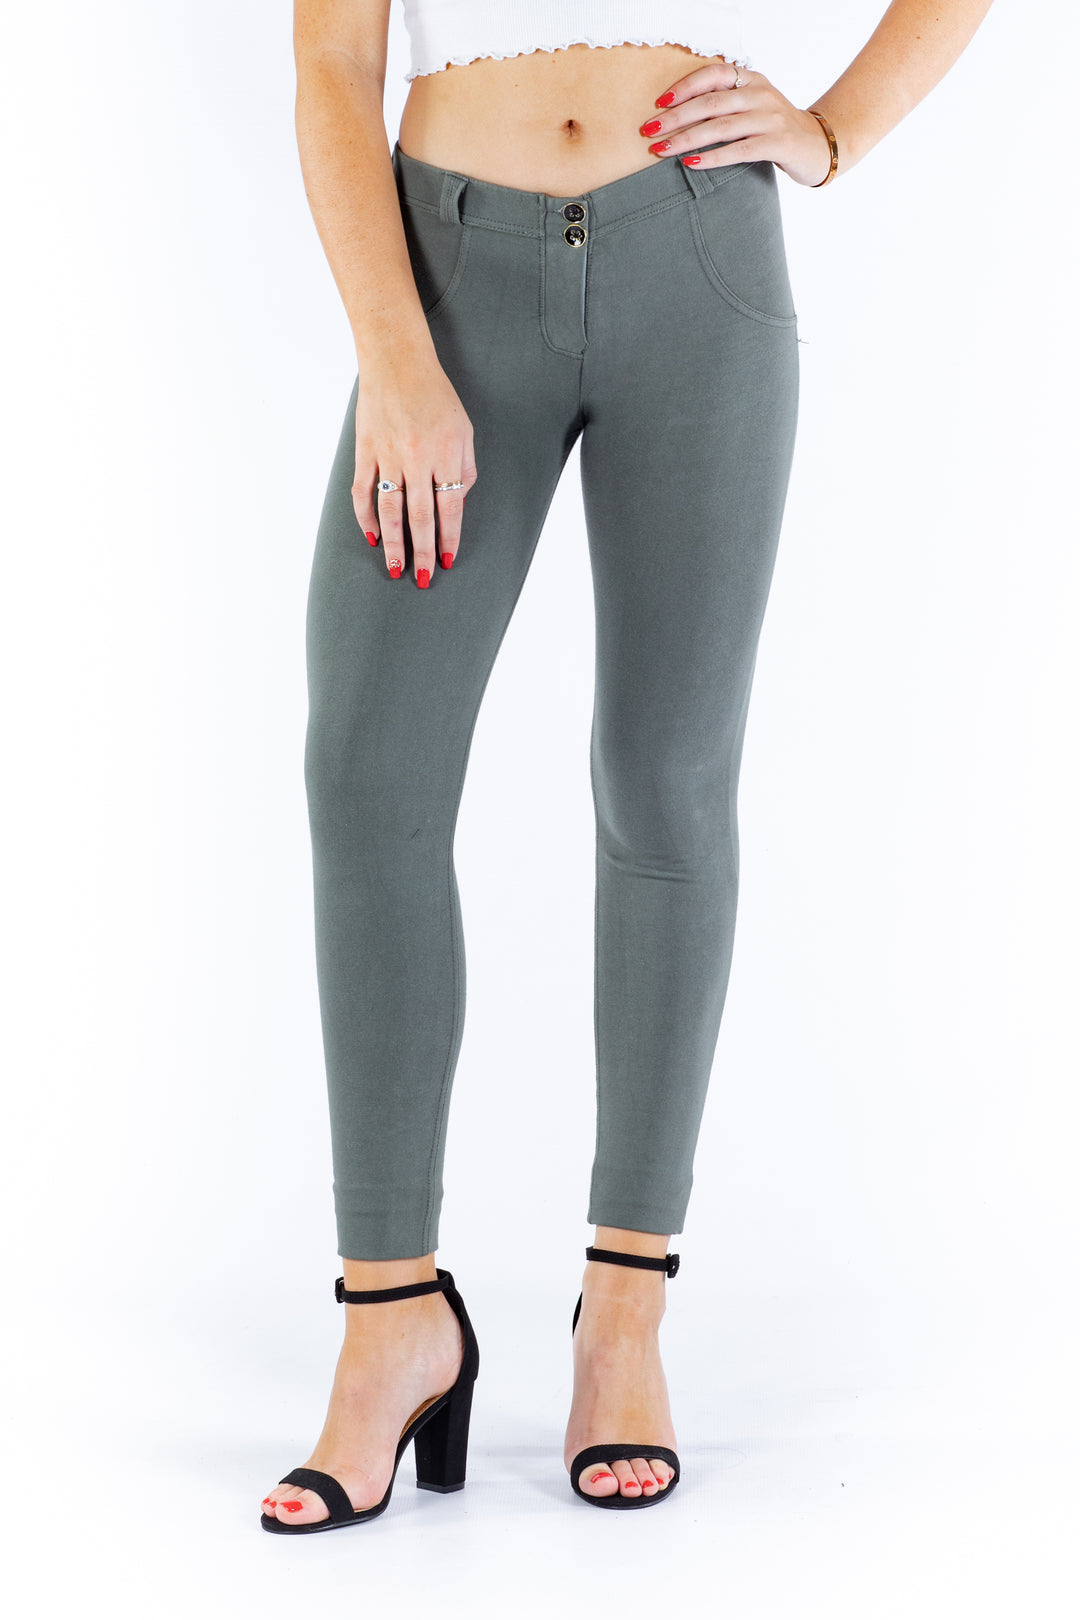 Mid waist Butt lifting Shaping pants - Oliveaos-init aos-animate